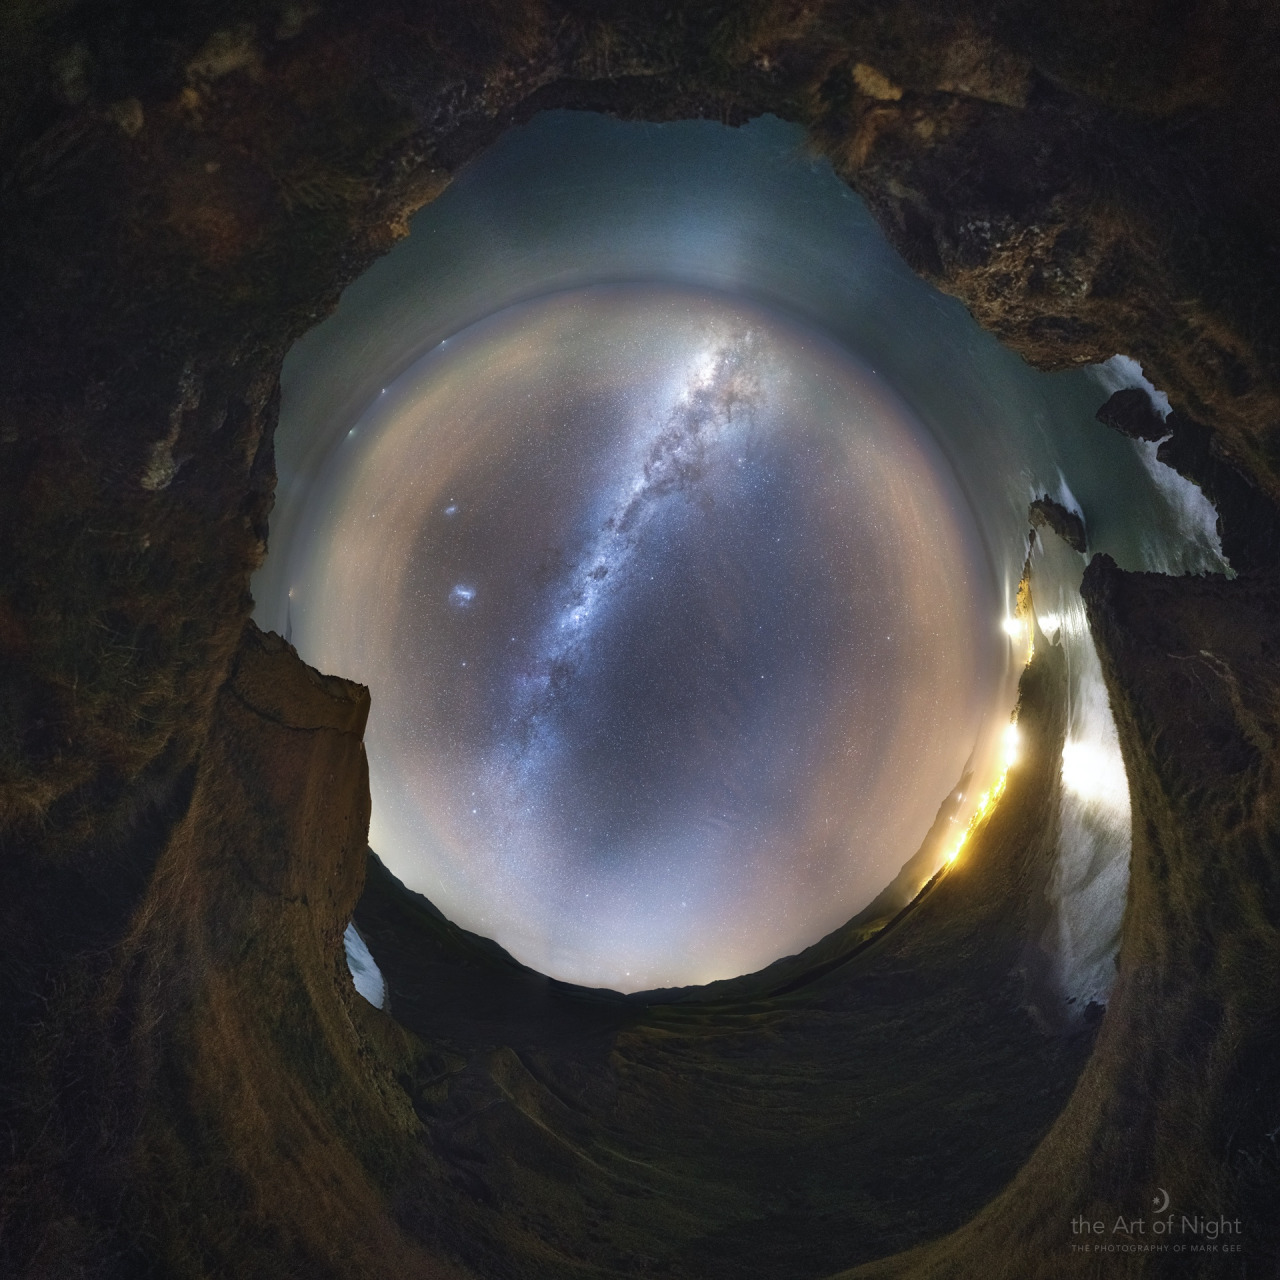 just&ndash;space:  Full sky dome with Milky Way and magellanic clouds above Castlepoint,